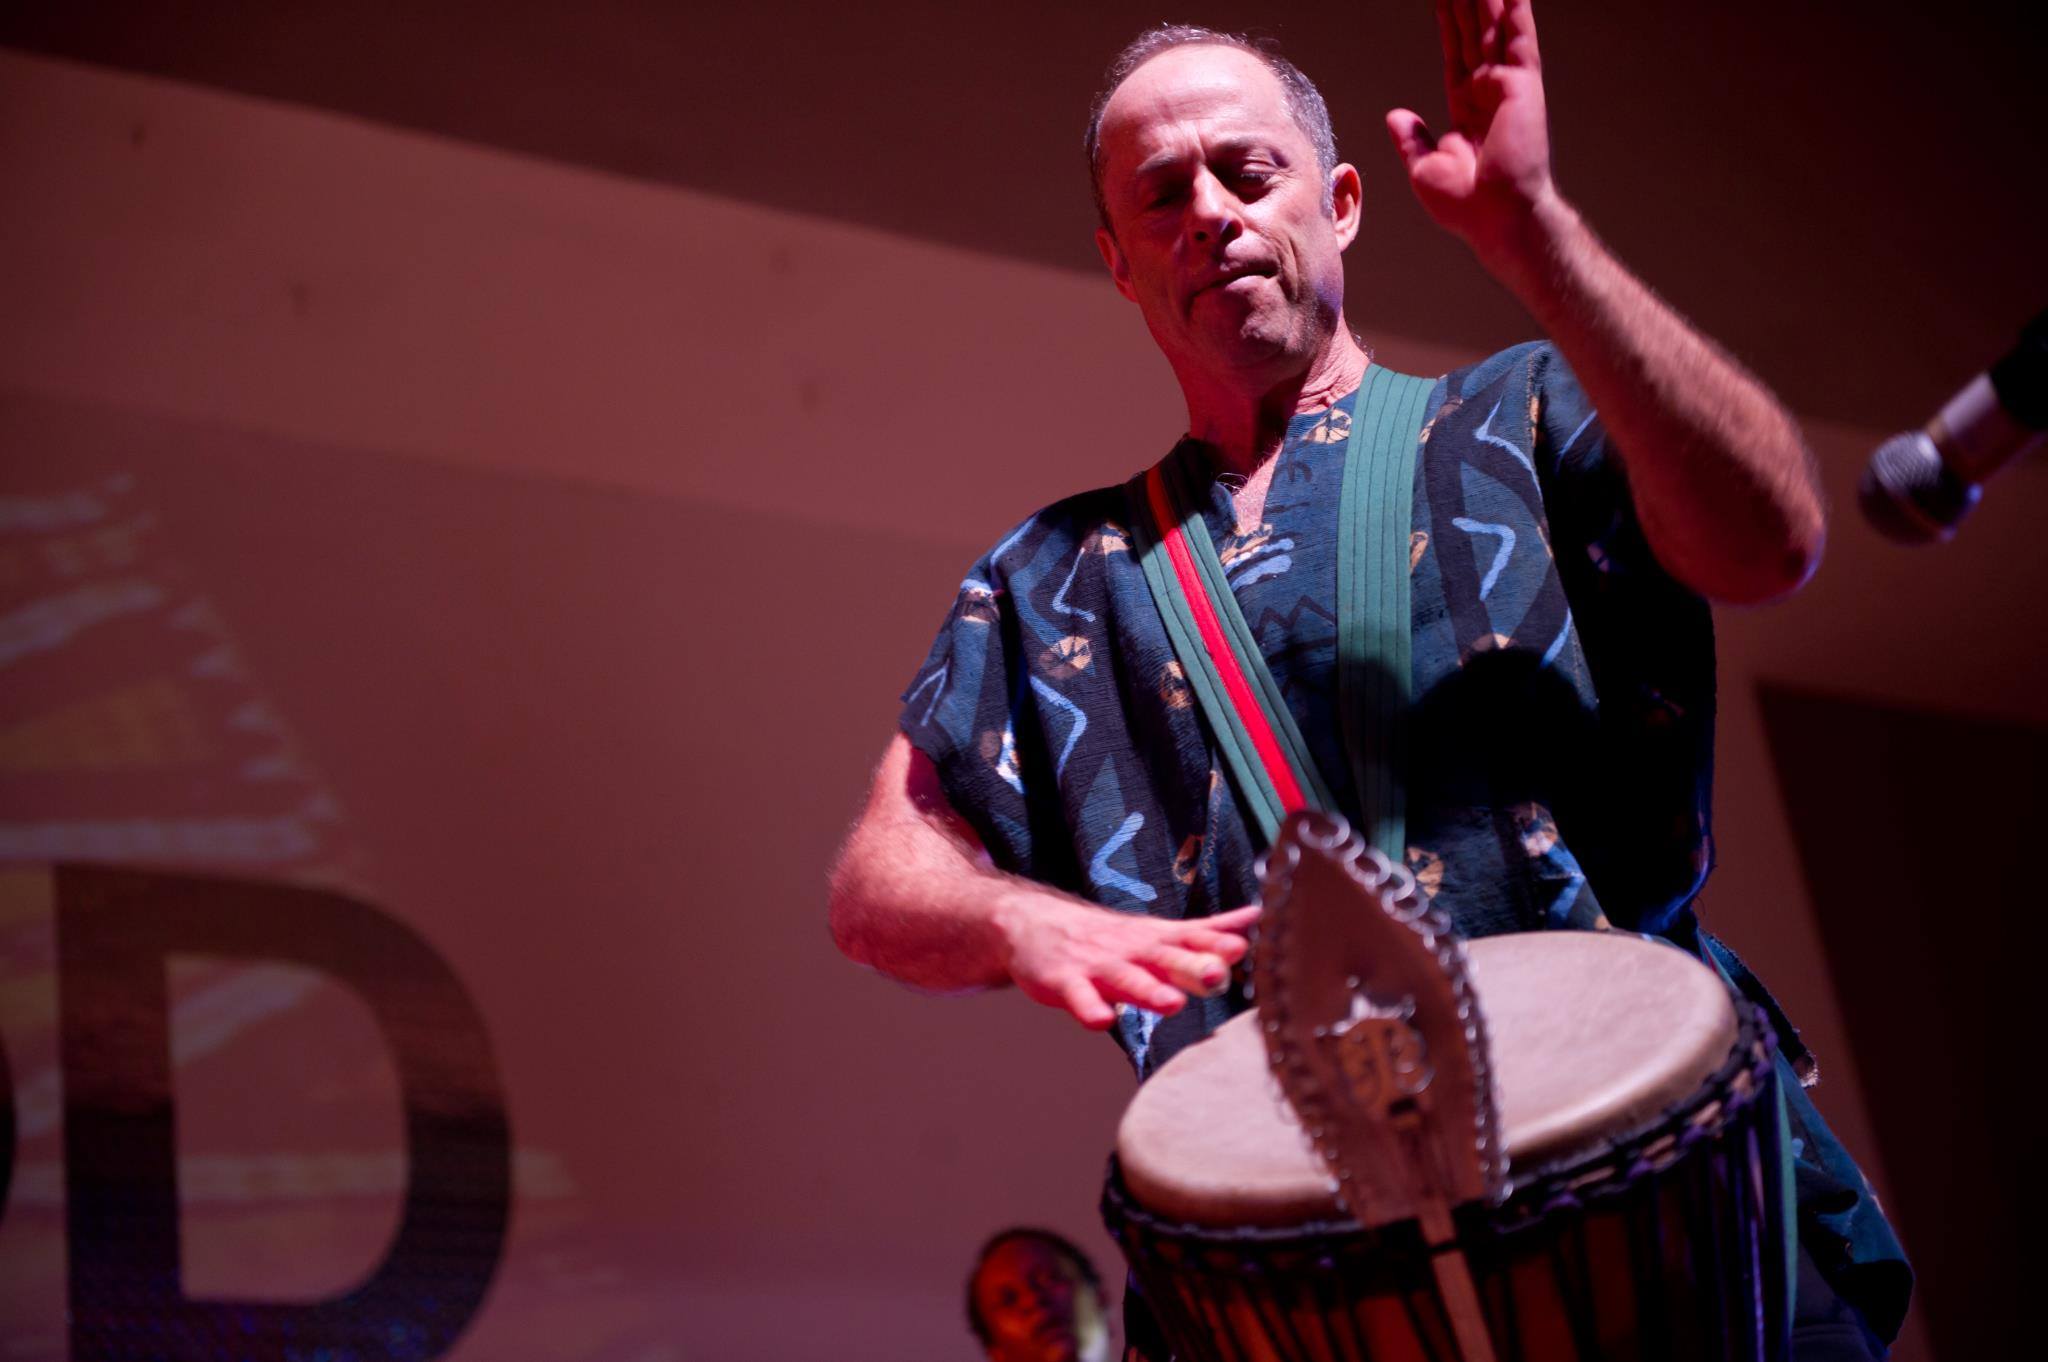 Hand Drum Intensives And Drumming Classes In Florida (May) And Maine (July)!